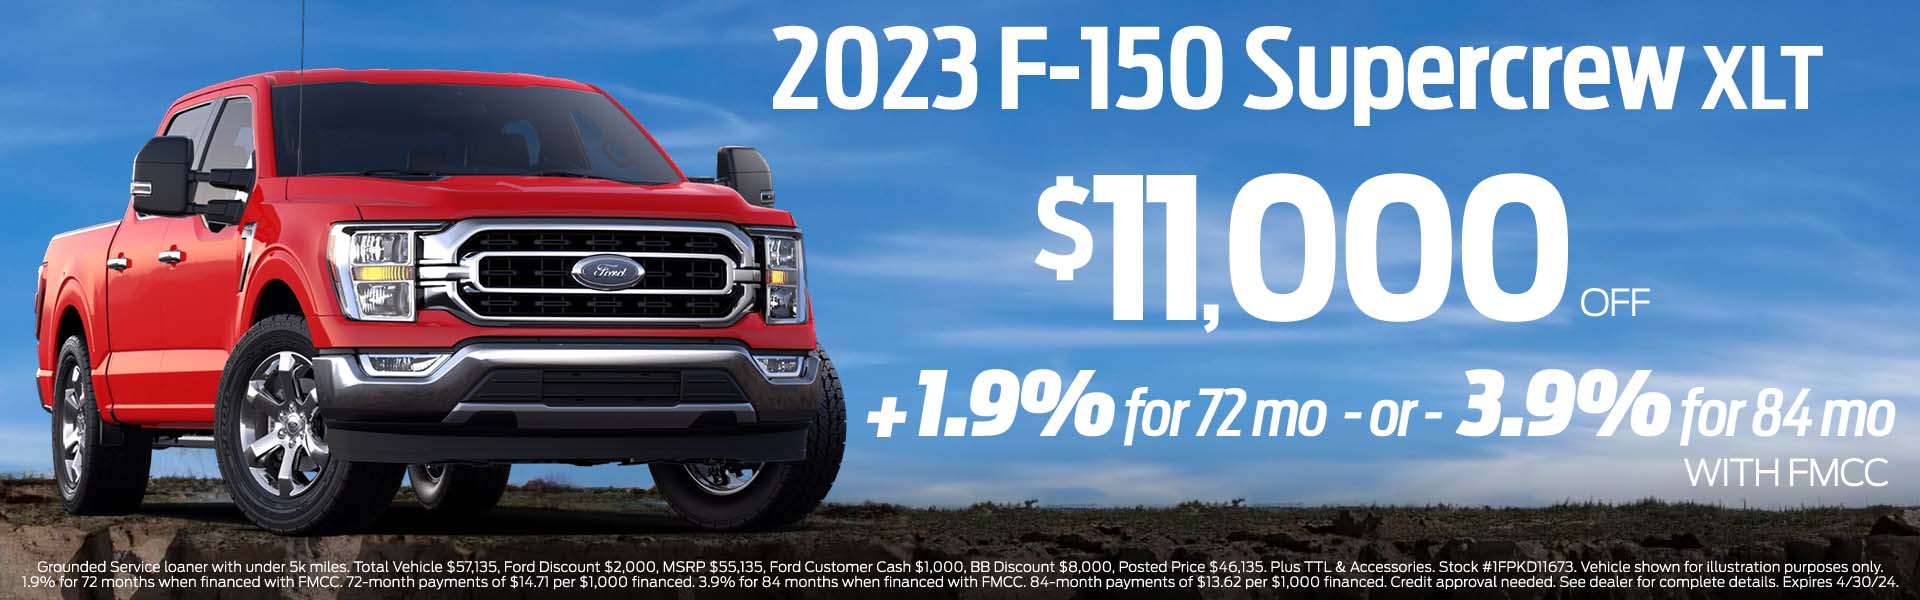 $11,000 off with FMCC F-150. 1.9% APR available